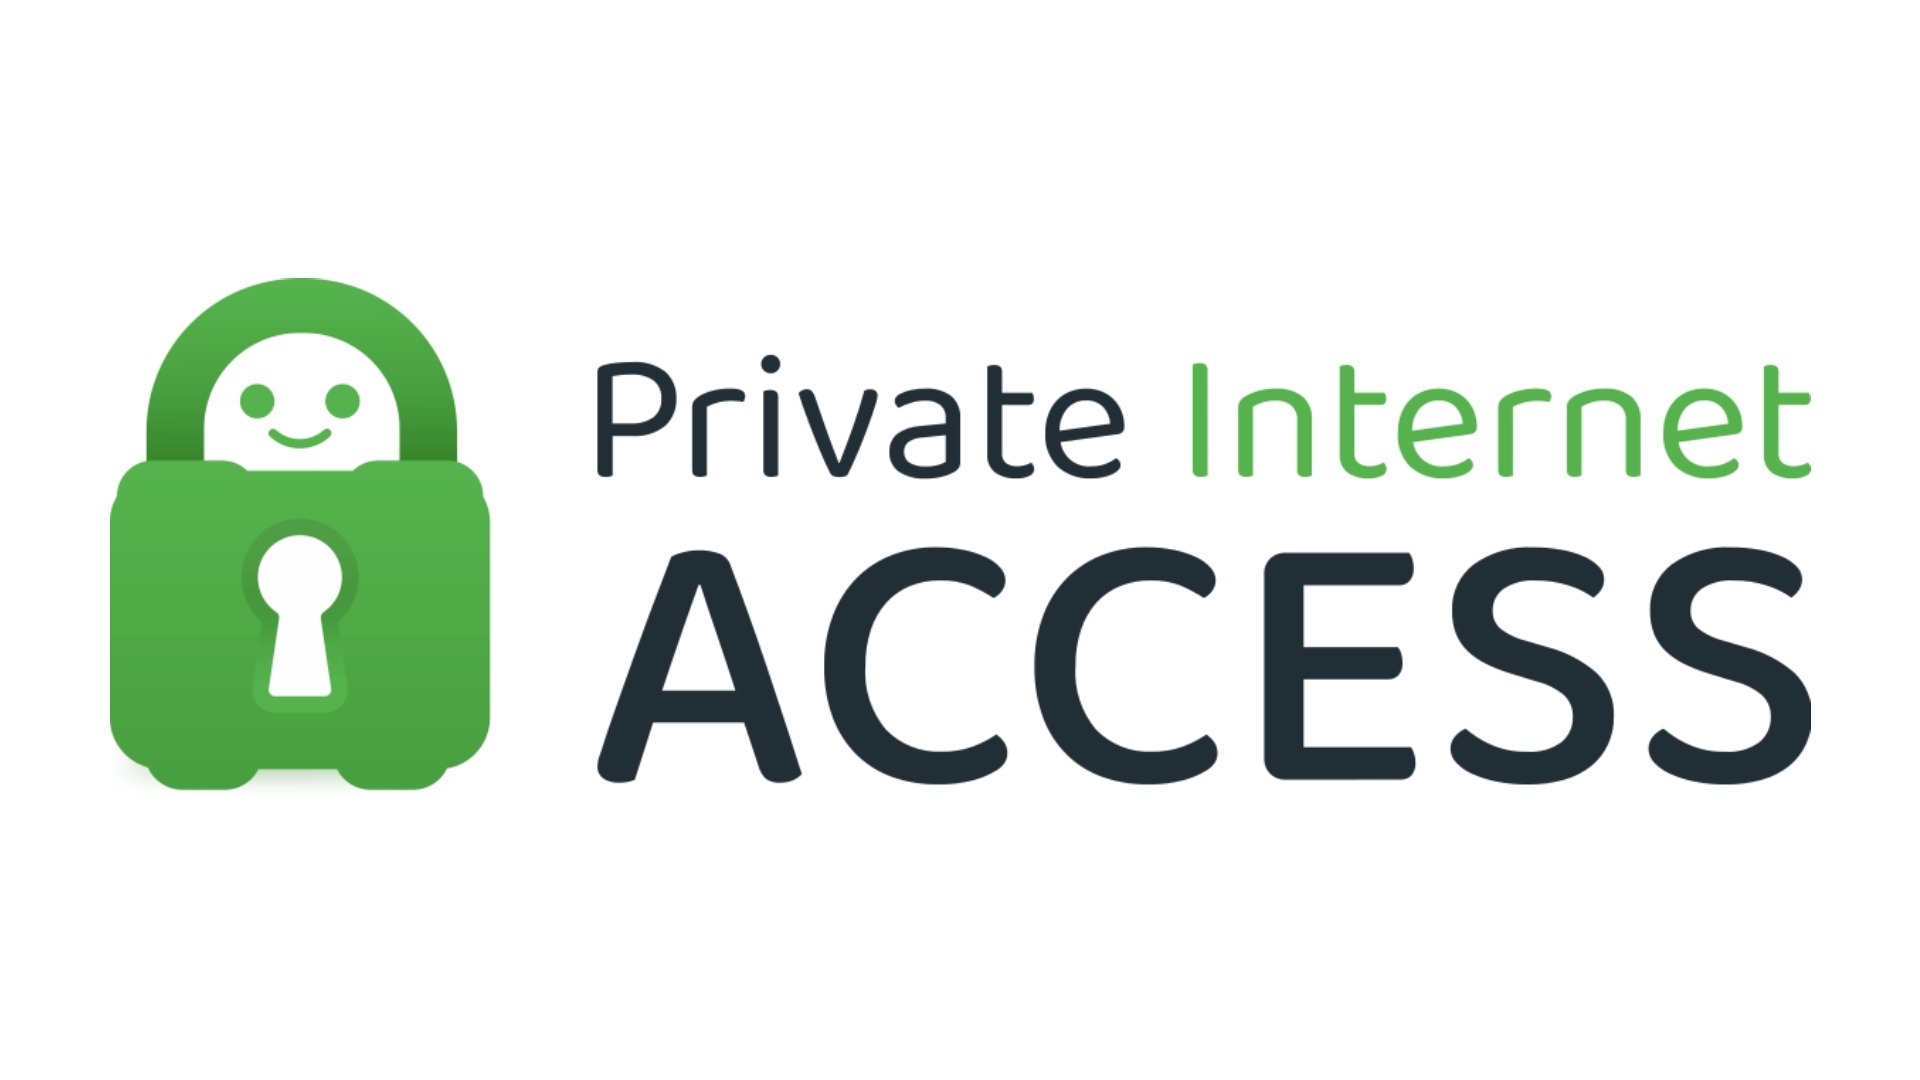 Best Tinder VPN: Private Internet Access. Image shows the company logo.